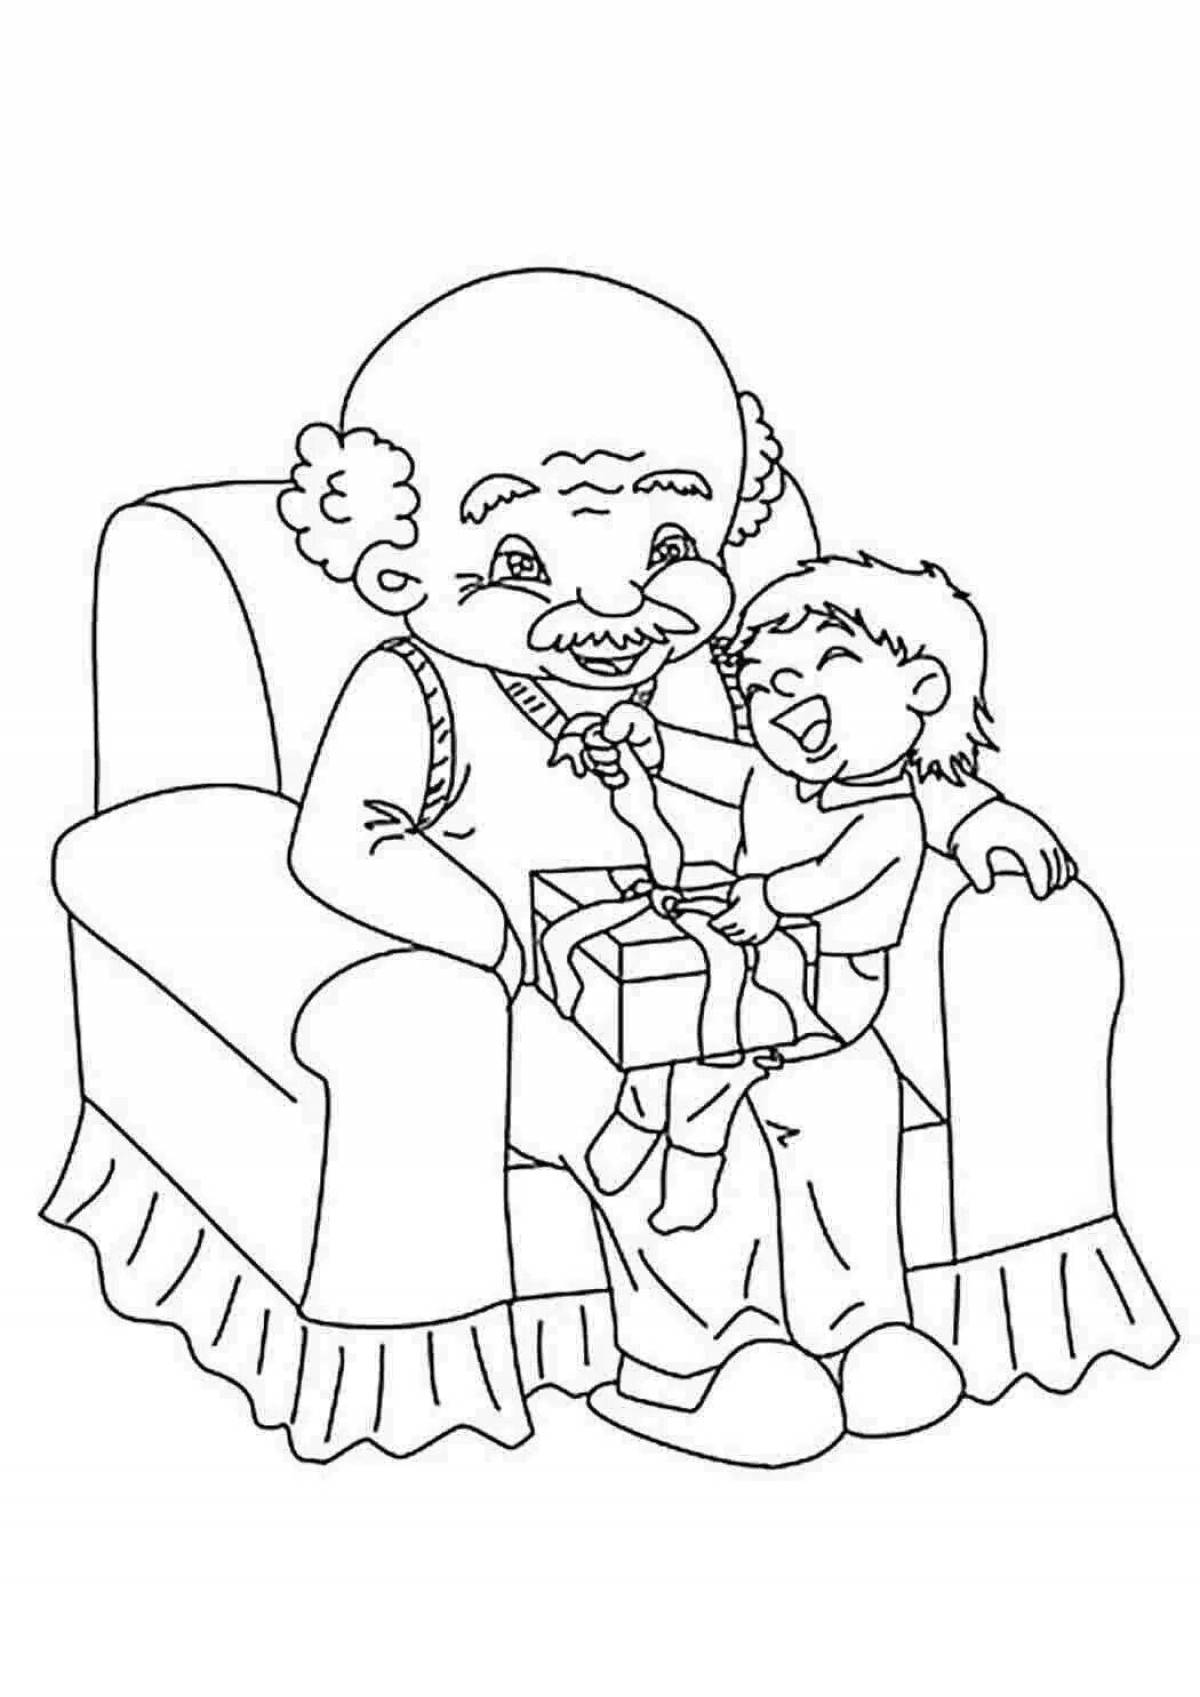 Great grandparents coloring pages for kids